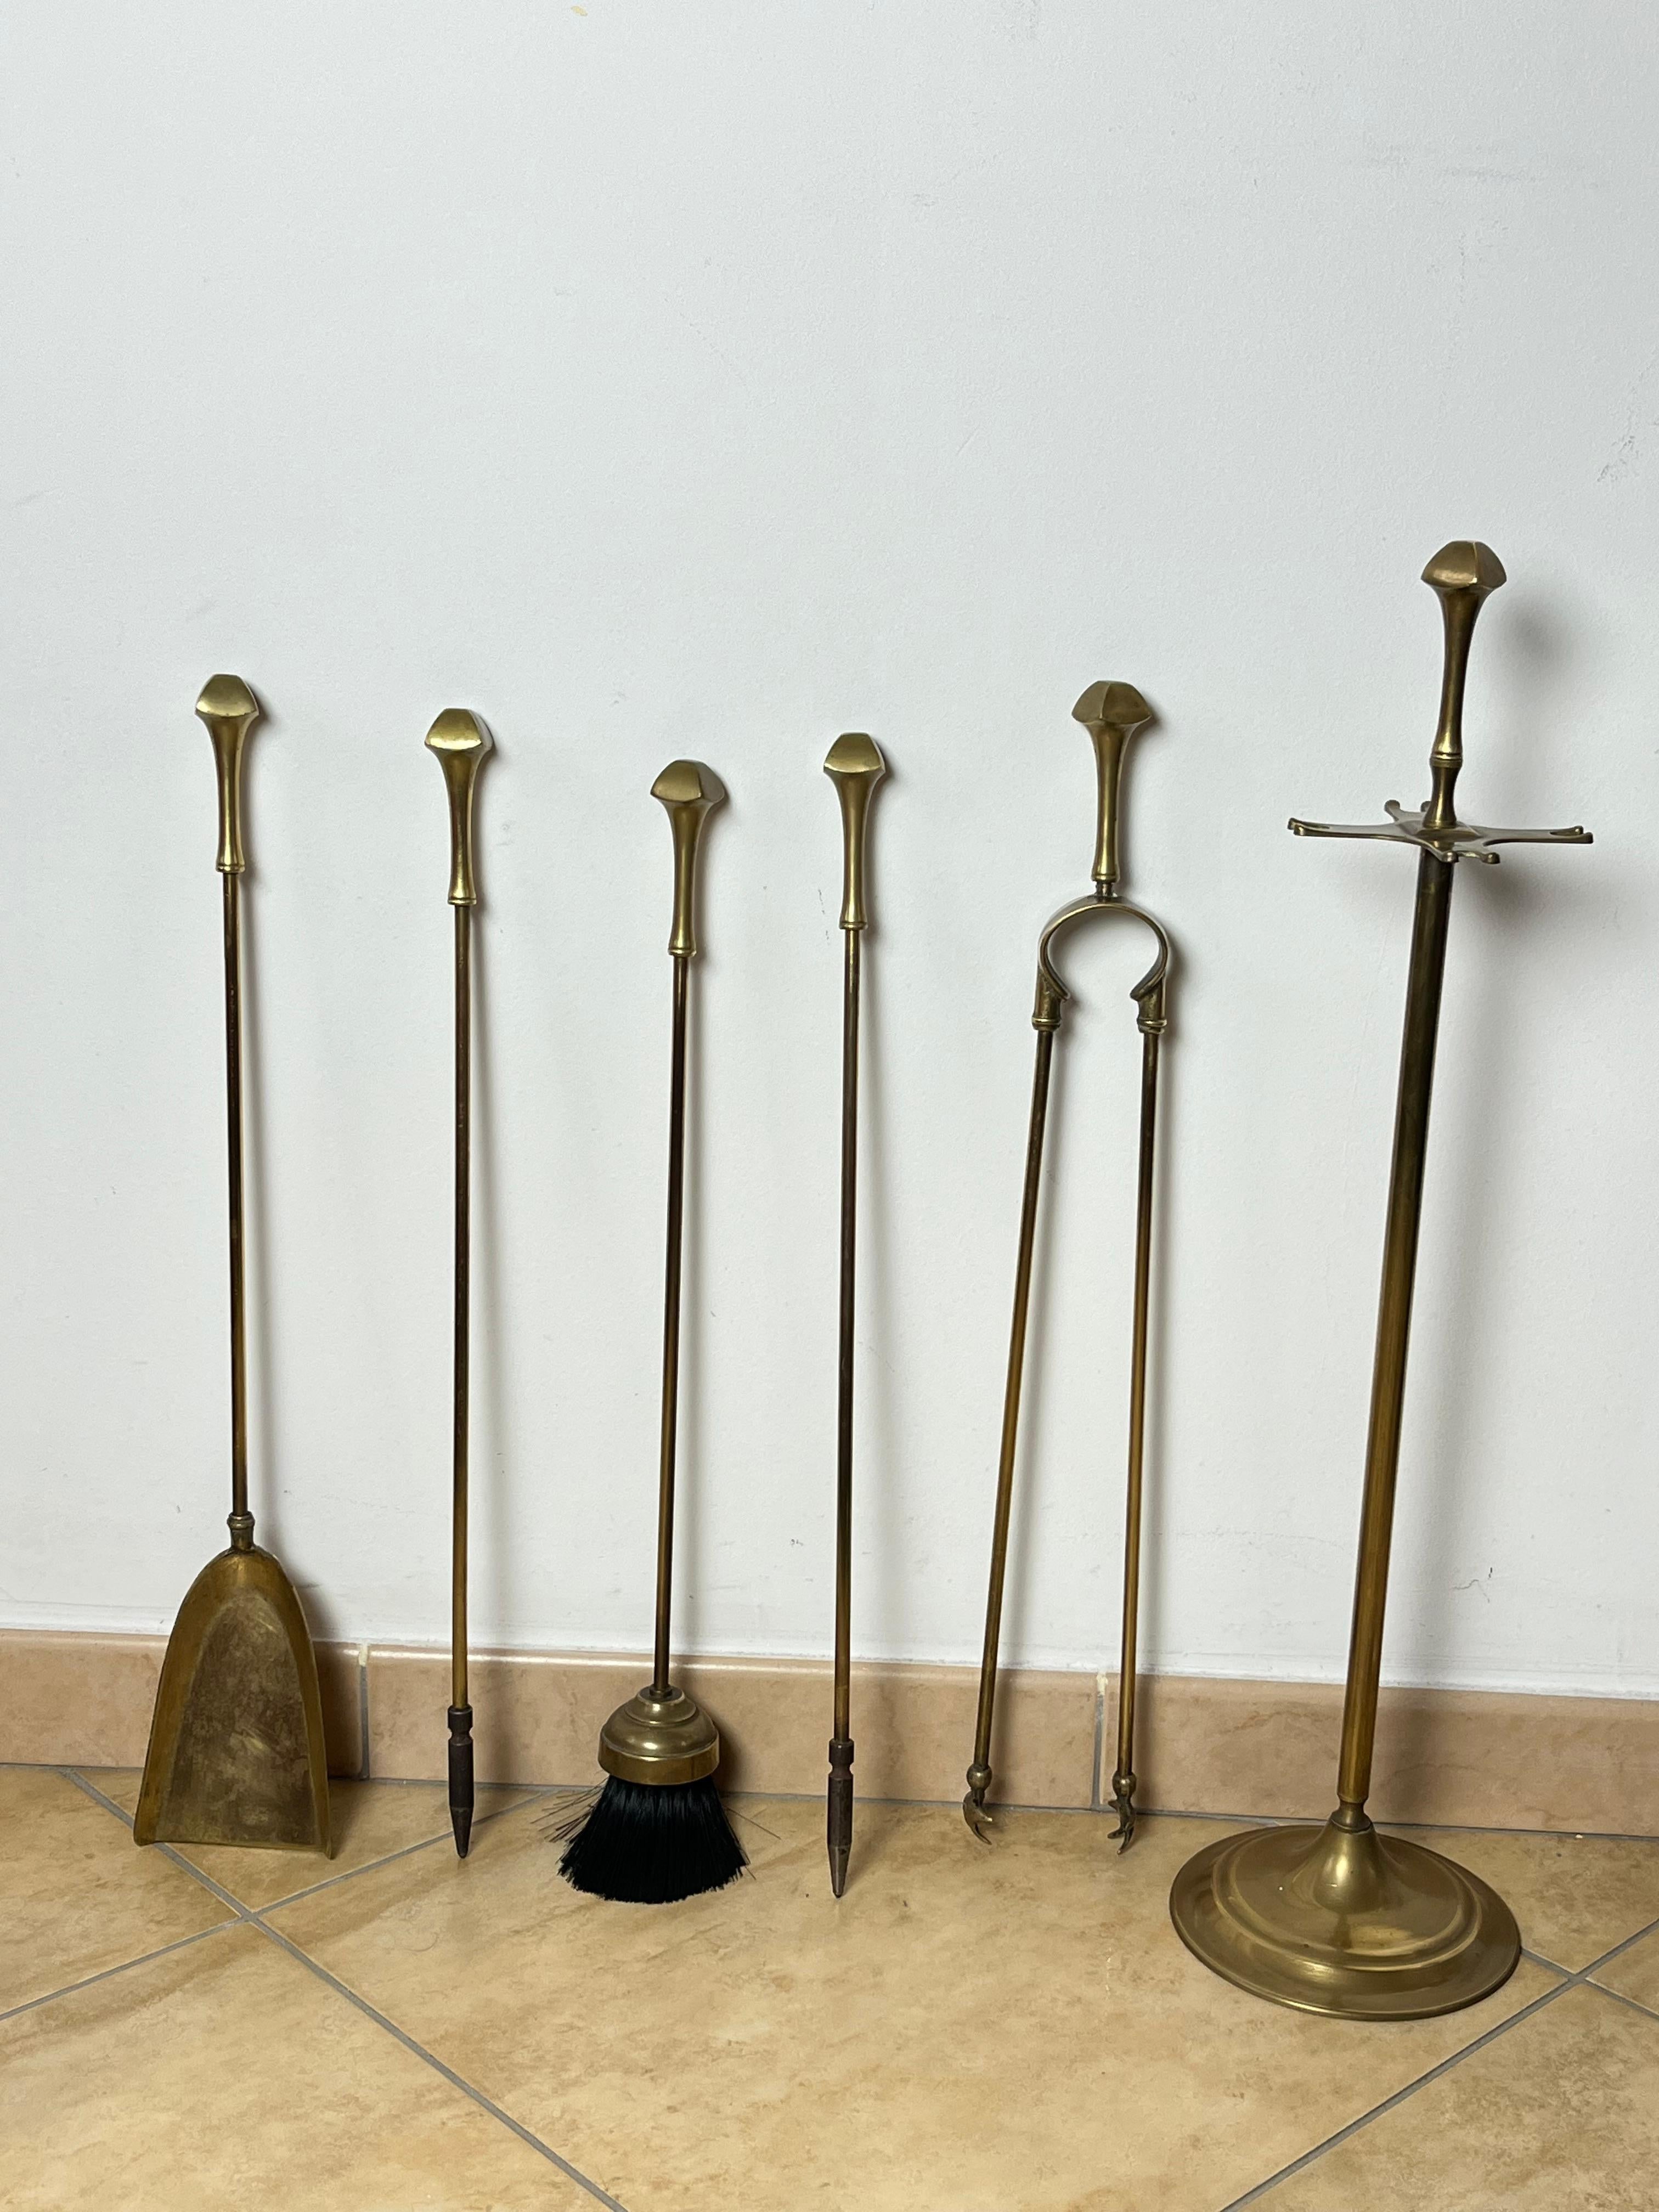 5-piece brass fireplace set and brass tool holder, Italy, 1970s
Found inside a noble villa, good condition.